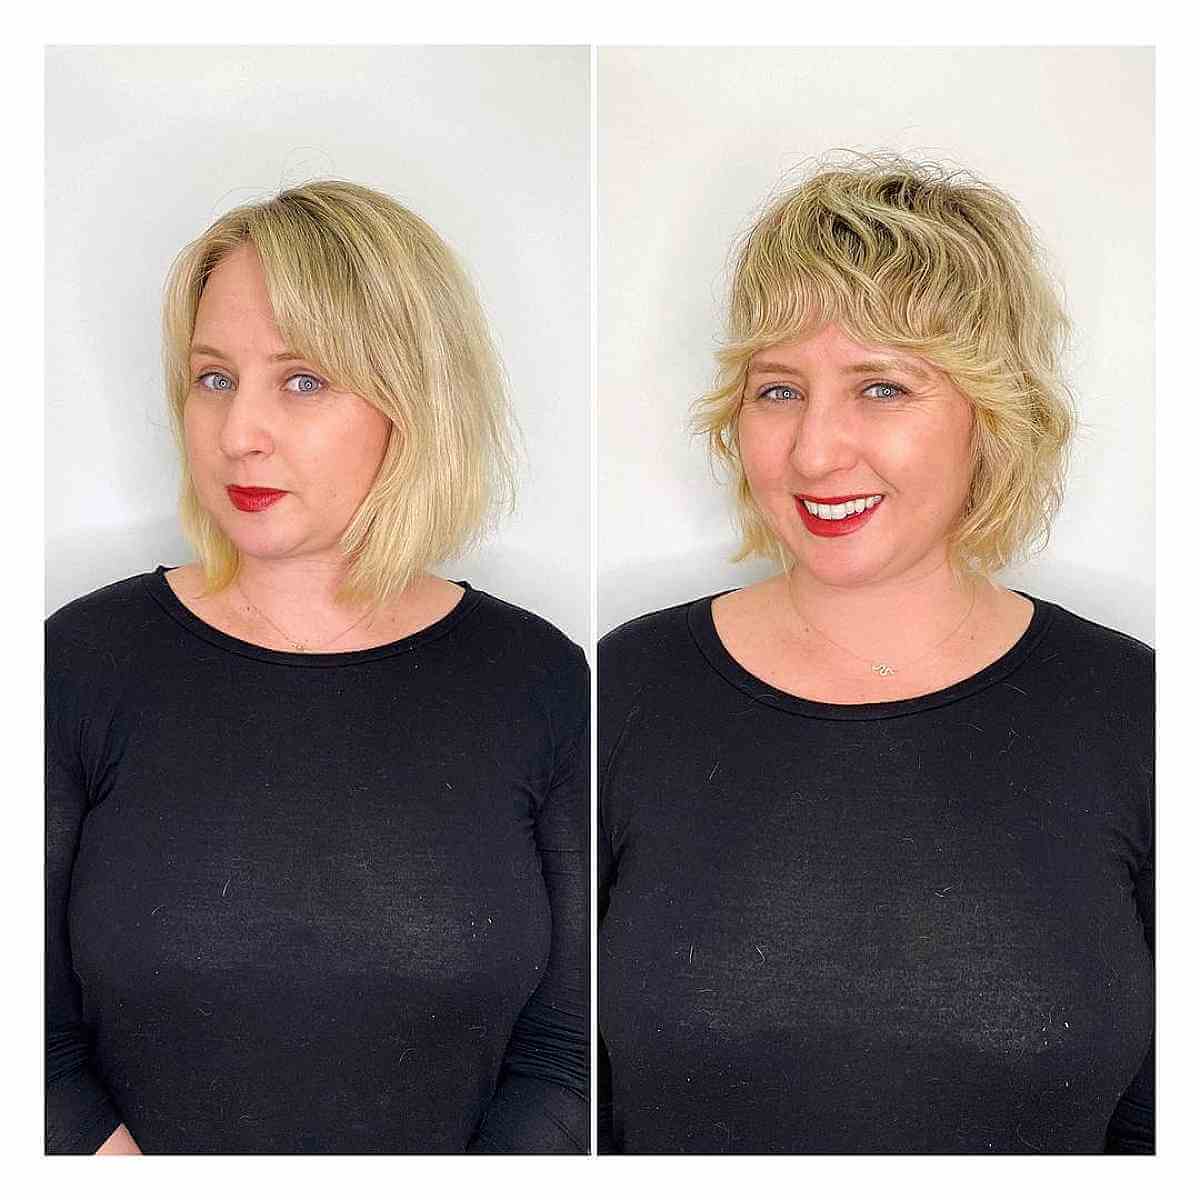 Chin-Length Shaggy Haircut with Fringe for Round Faces